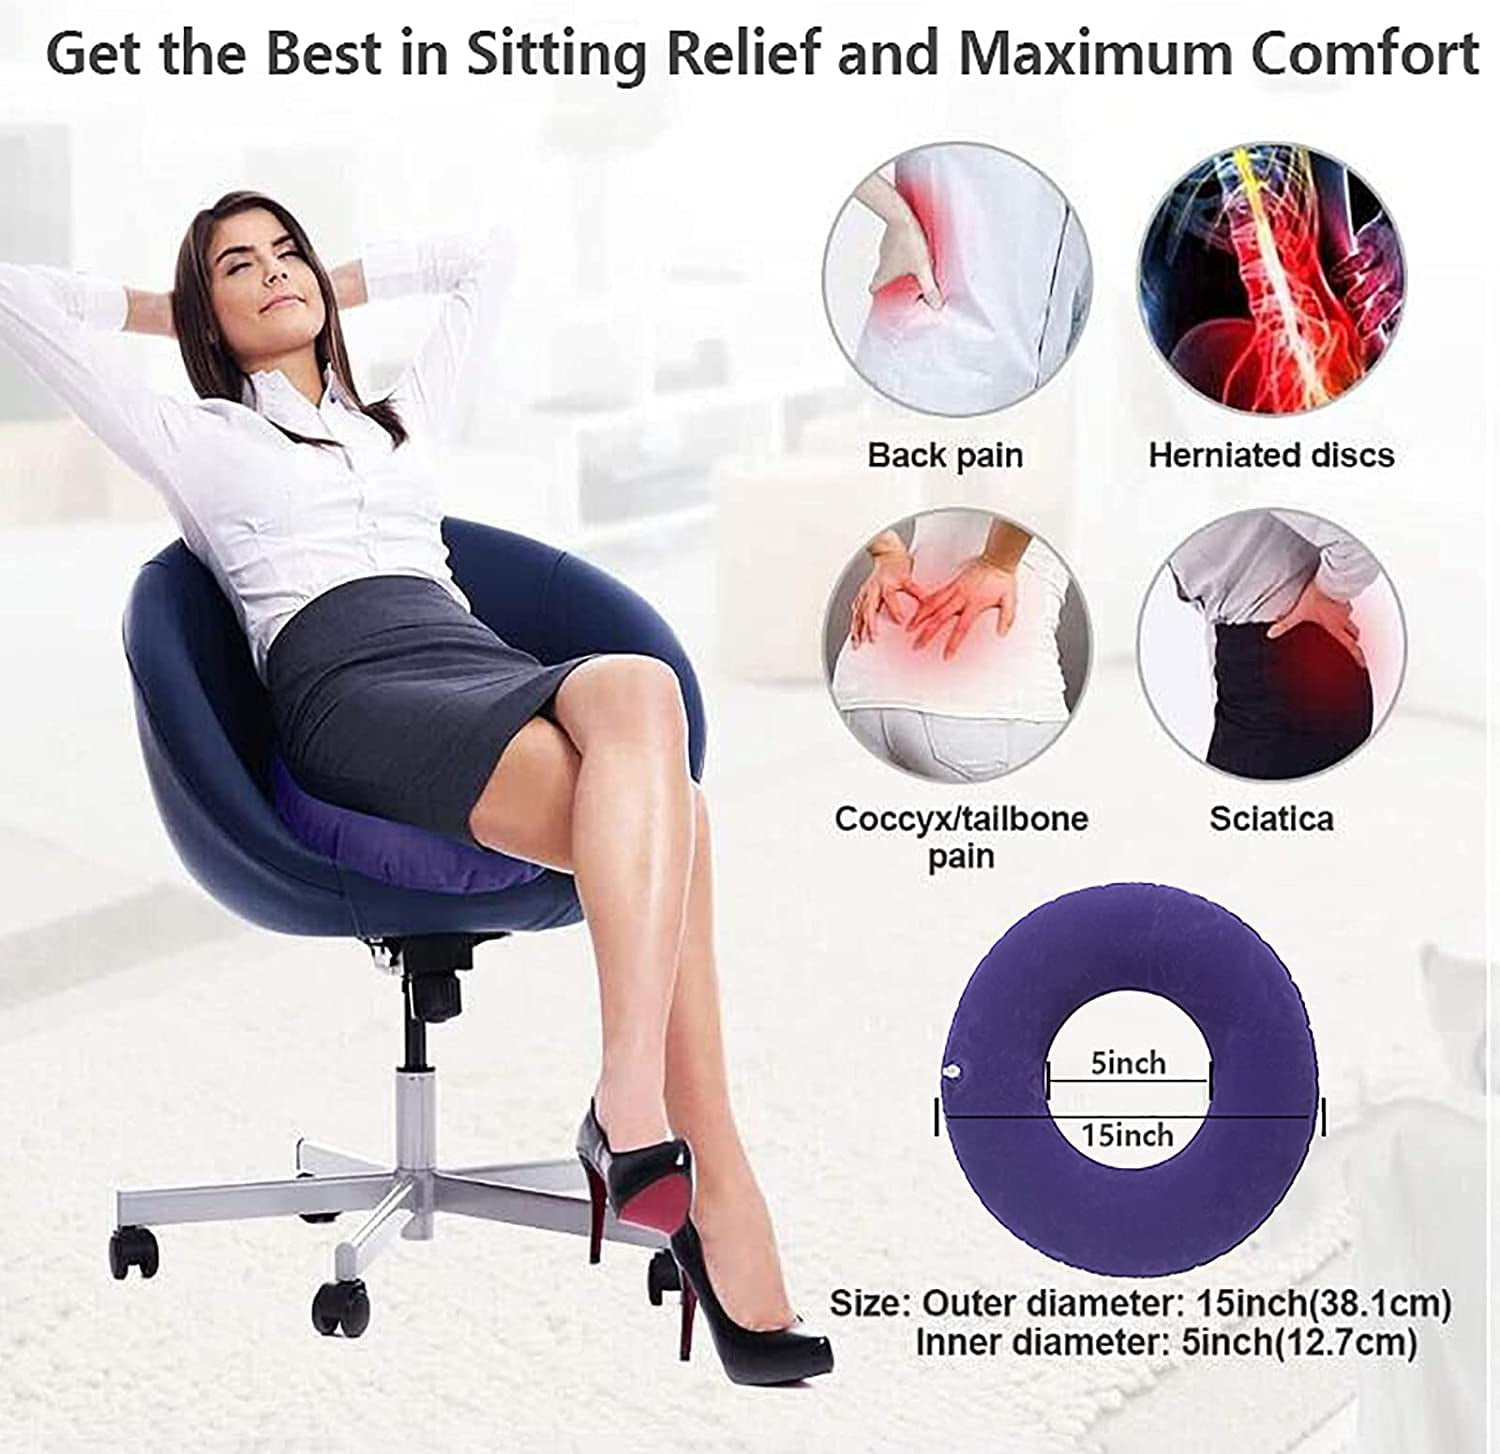 Donut Pillow for Tailbone Pain Relief Cushion for Sitting for Postpartum  Pregnancy, Butt Seat Cushion, Back, Coccyx, Sciatica - AliExpress